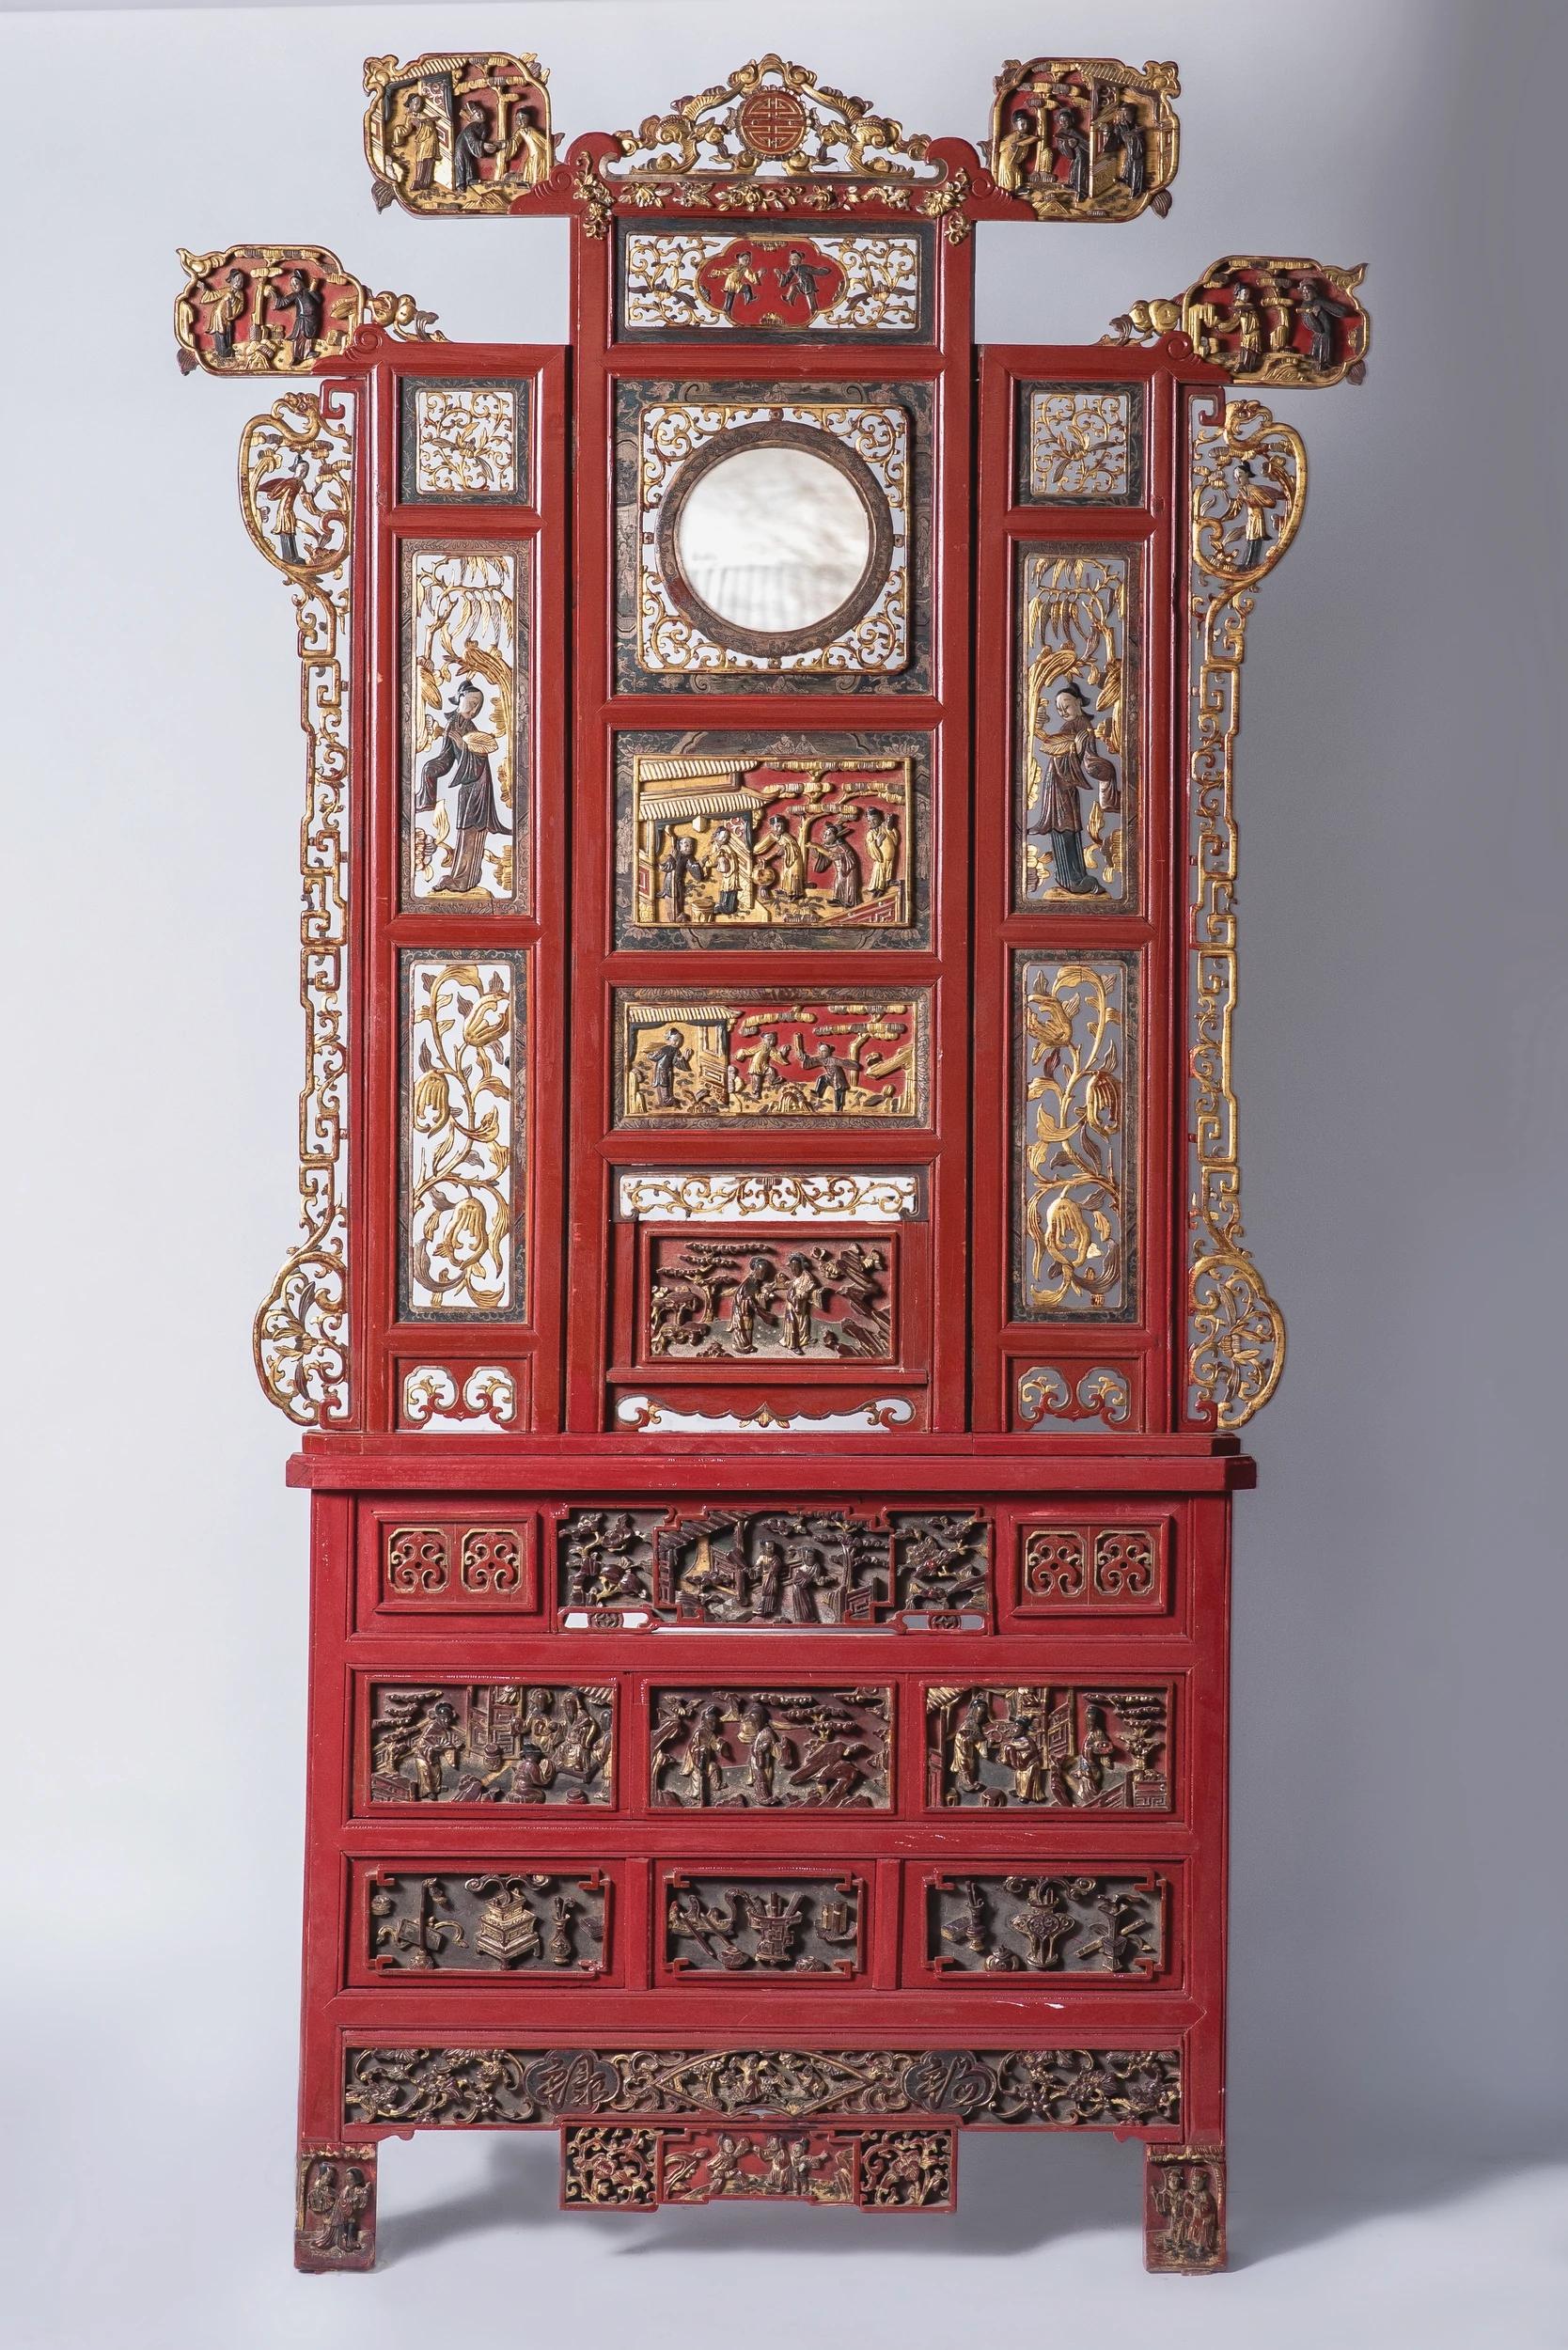 Carved Two Chinese panels, late 19th century, China, circa 1880